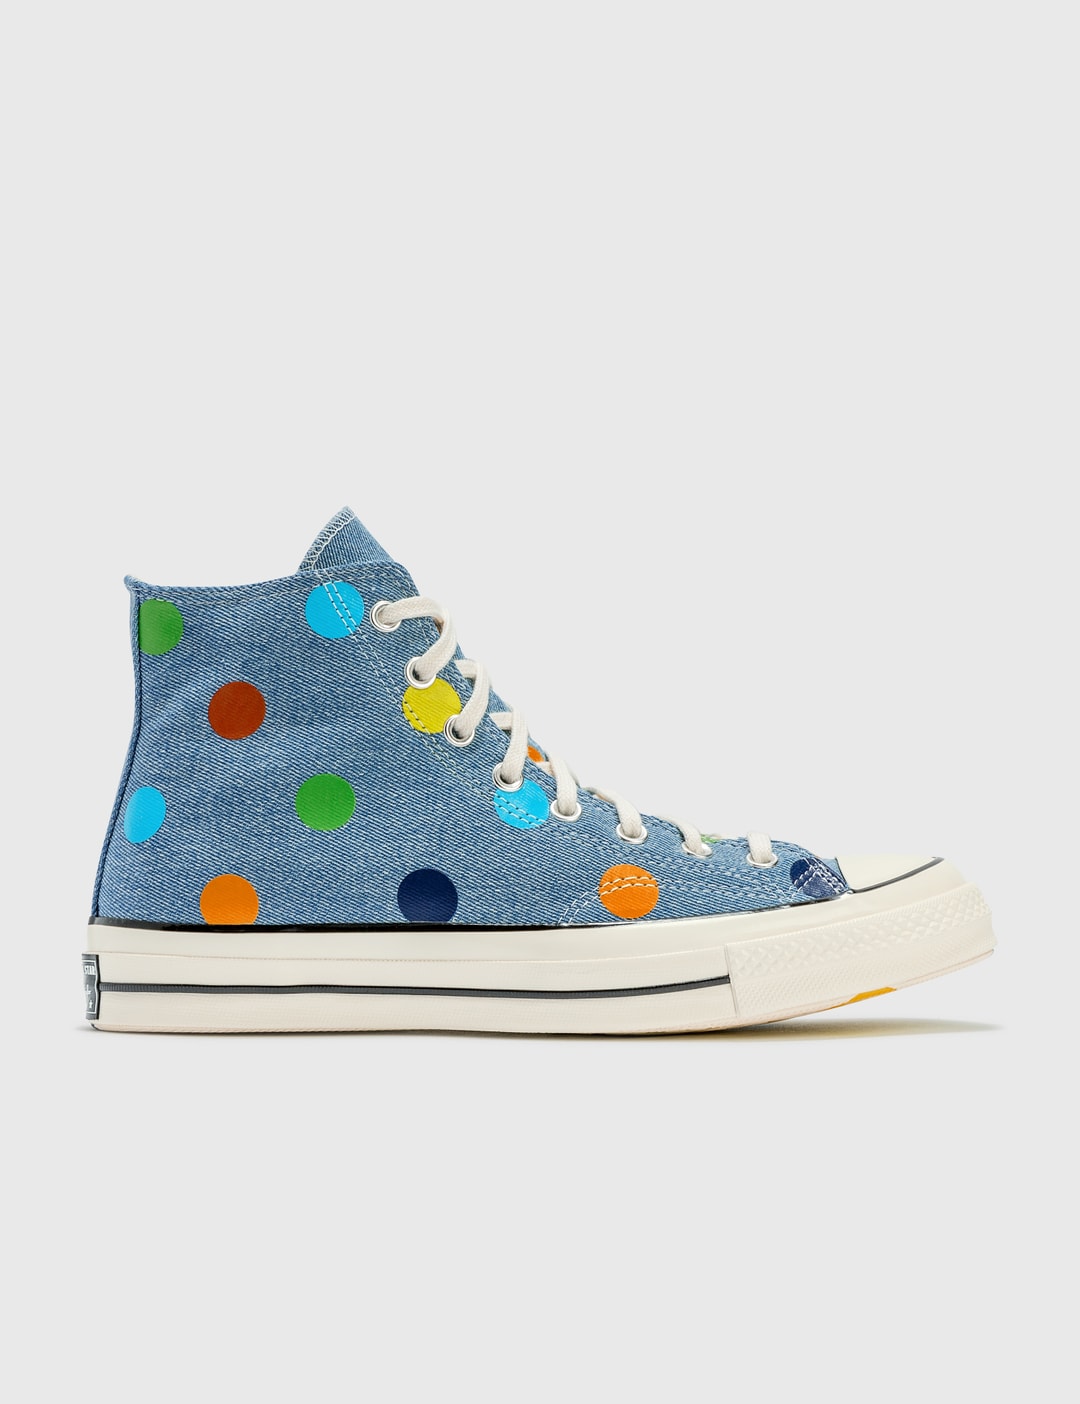 Etablering Tahiti ihærdige Converse - Converse x Golf Wang Chuck 70 | HBX - Globally Curated Fashion  and Lifestyle by Hypebeast